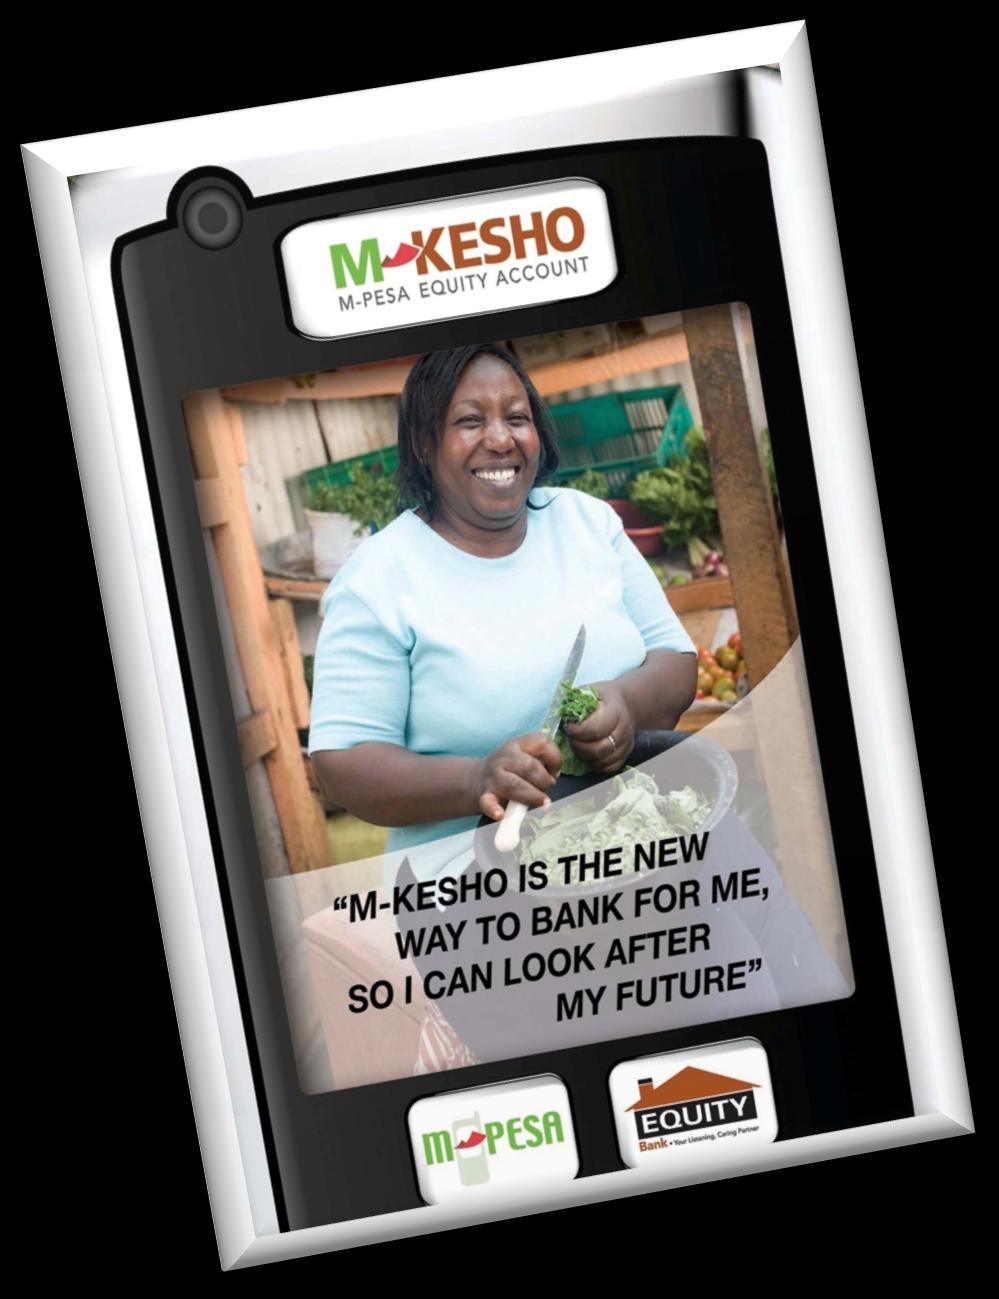 M-KESHO: Another World First - Over 700,000 customers!